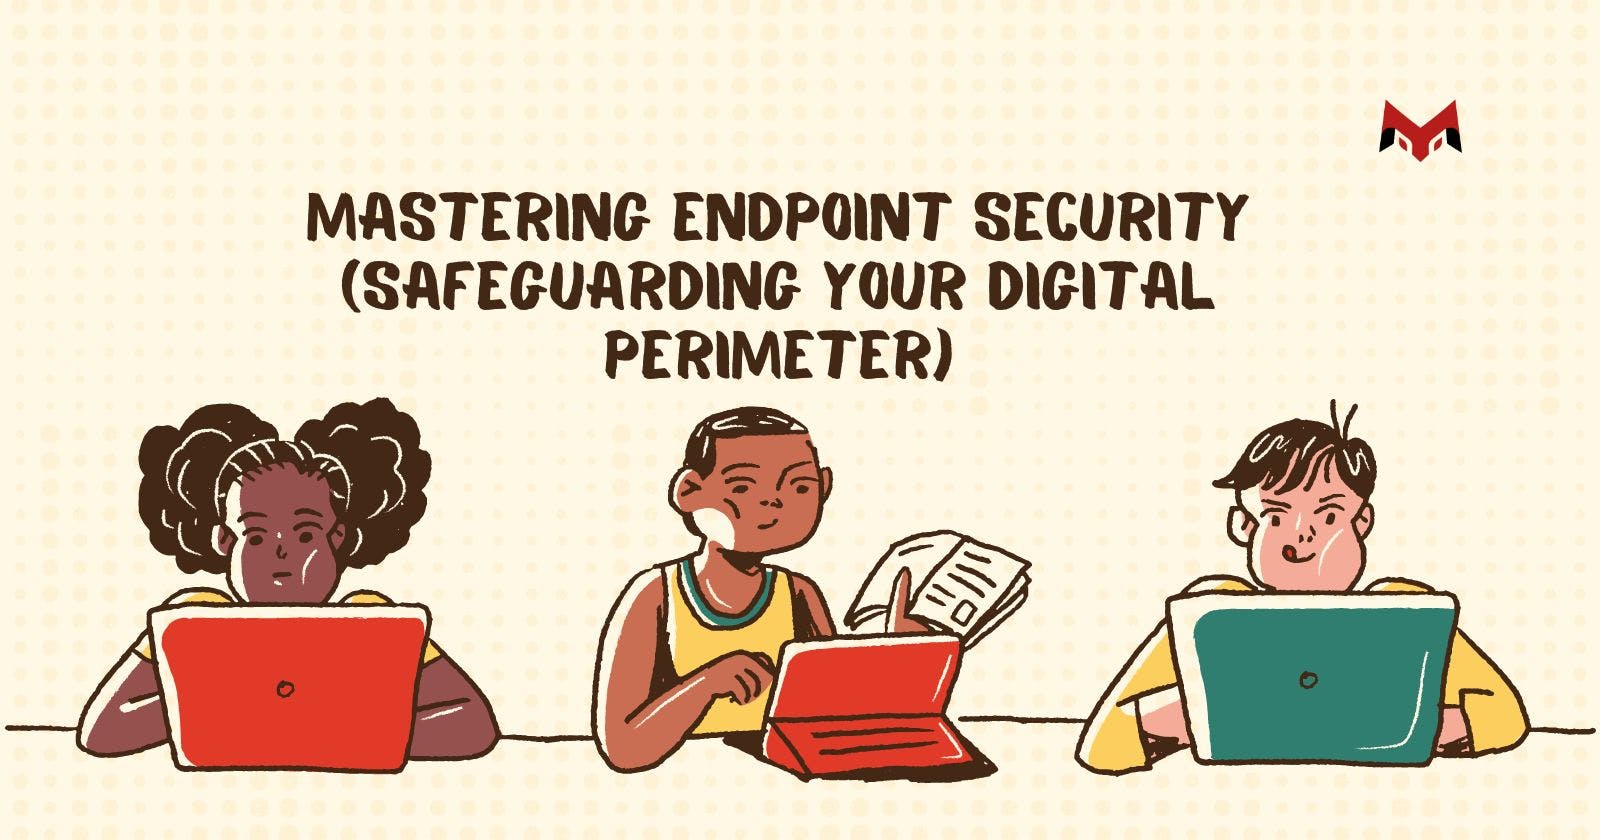 Mastering Endpoint Security (Safeguarding Your Digital Perimeter)